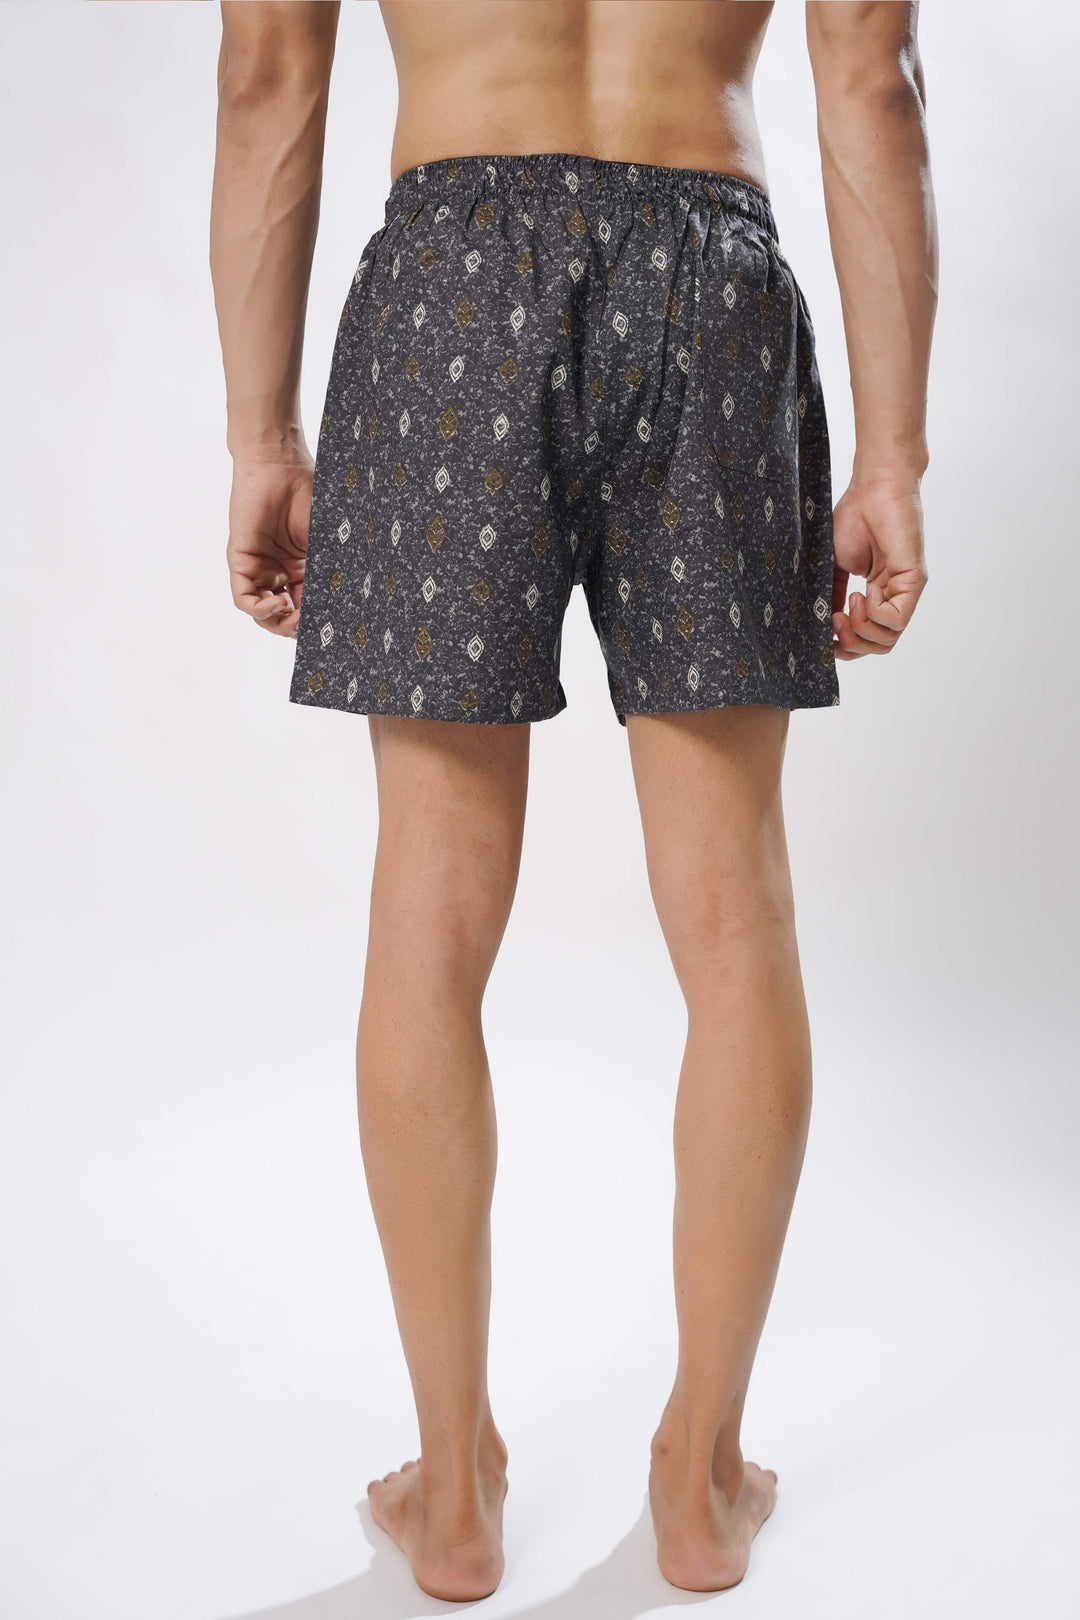 Grey All Over Printed Men's Boxers